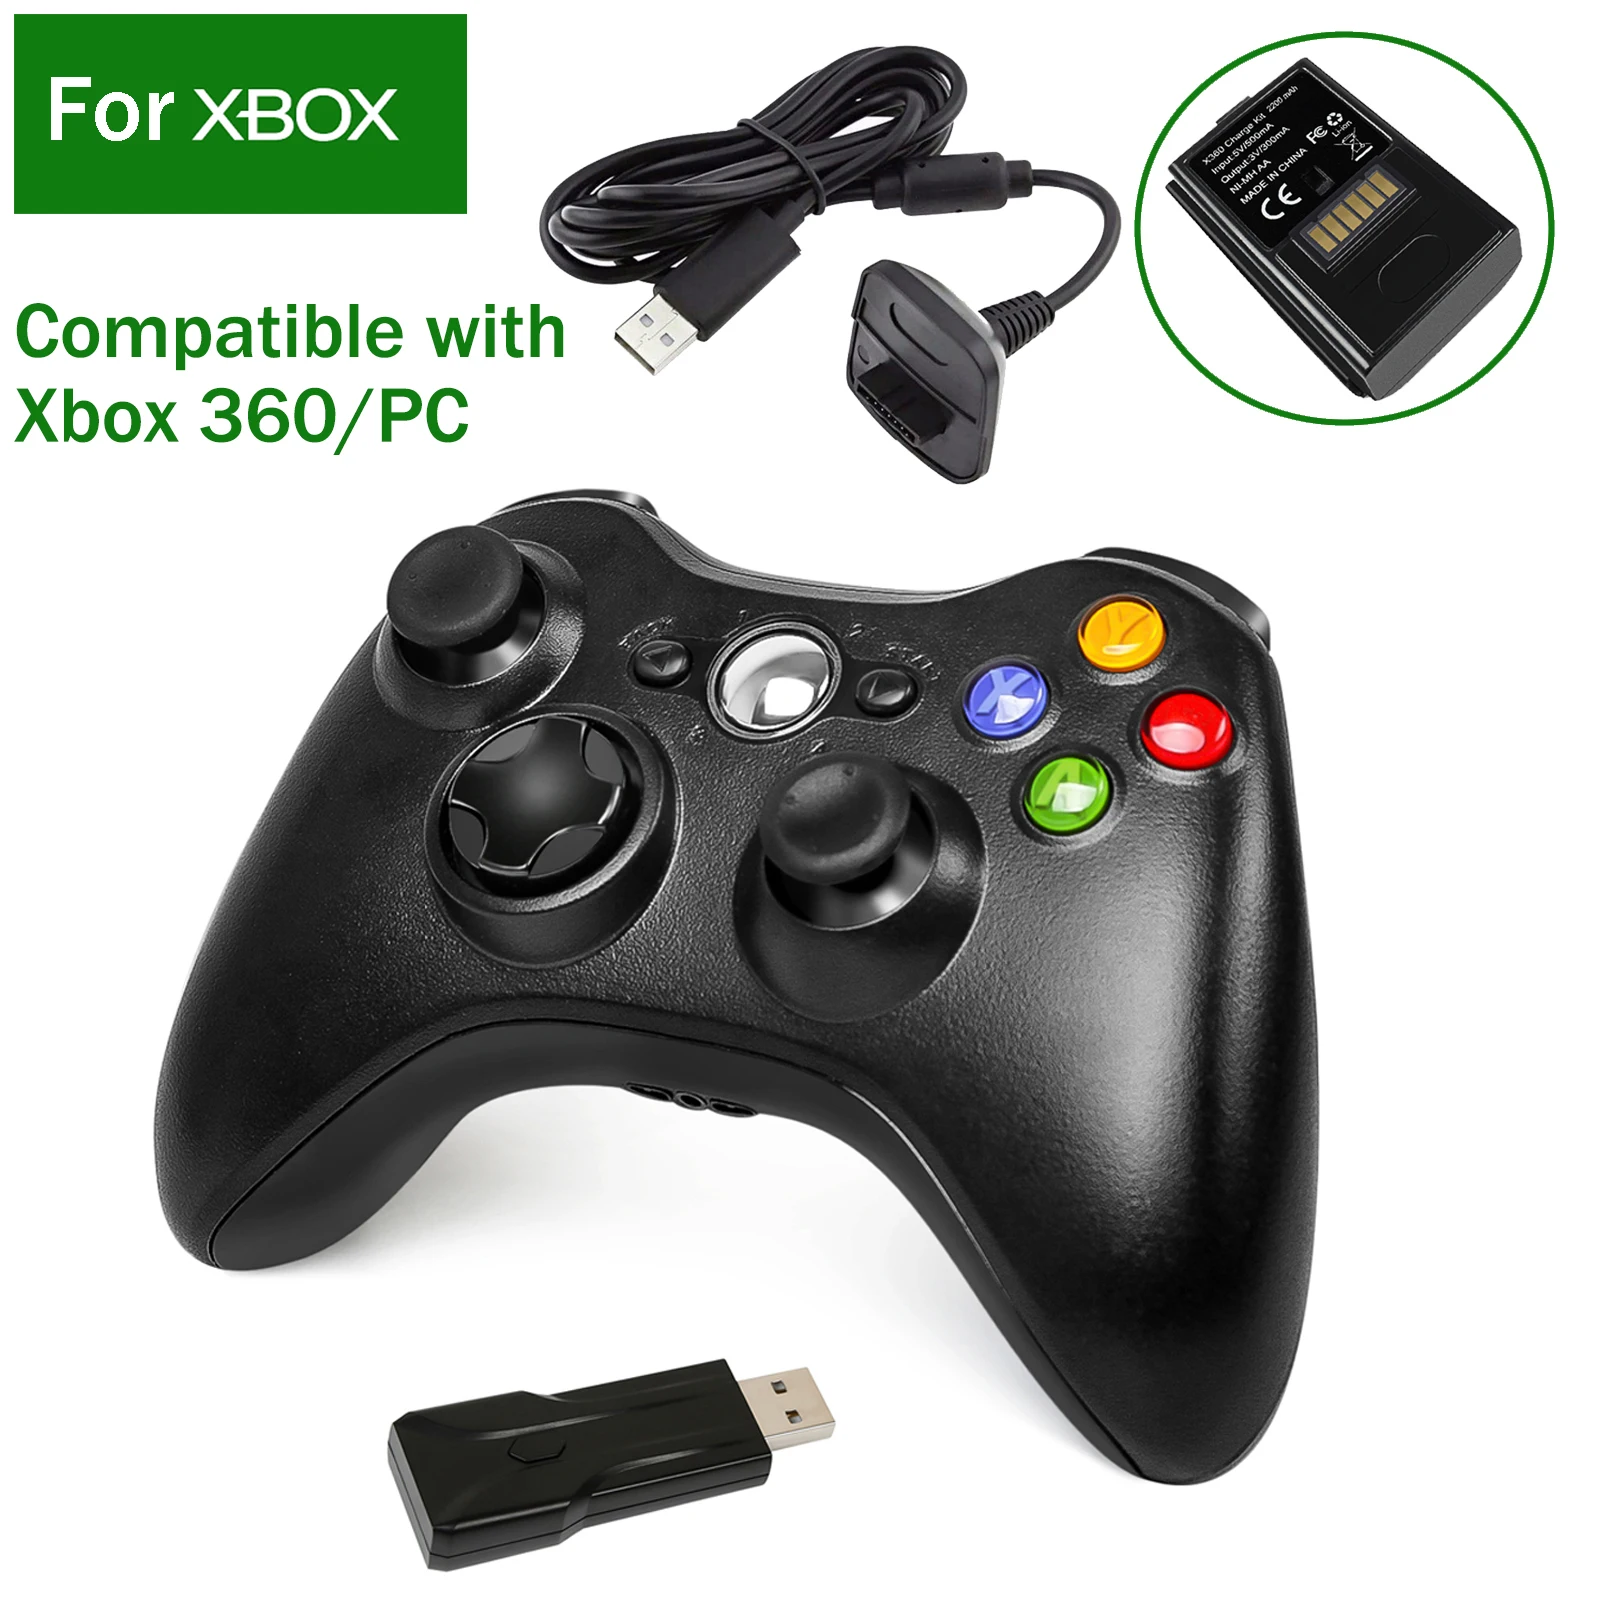 

For Xbox 360 Controller 2.4G Wireless Gamepad Joystick For Microsoft XBOX360 For PC Windows 7/8/10 Game Controller Joypad